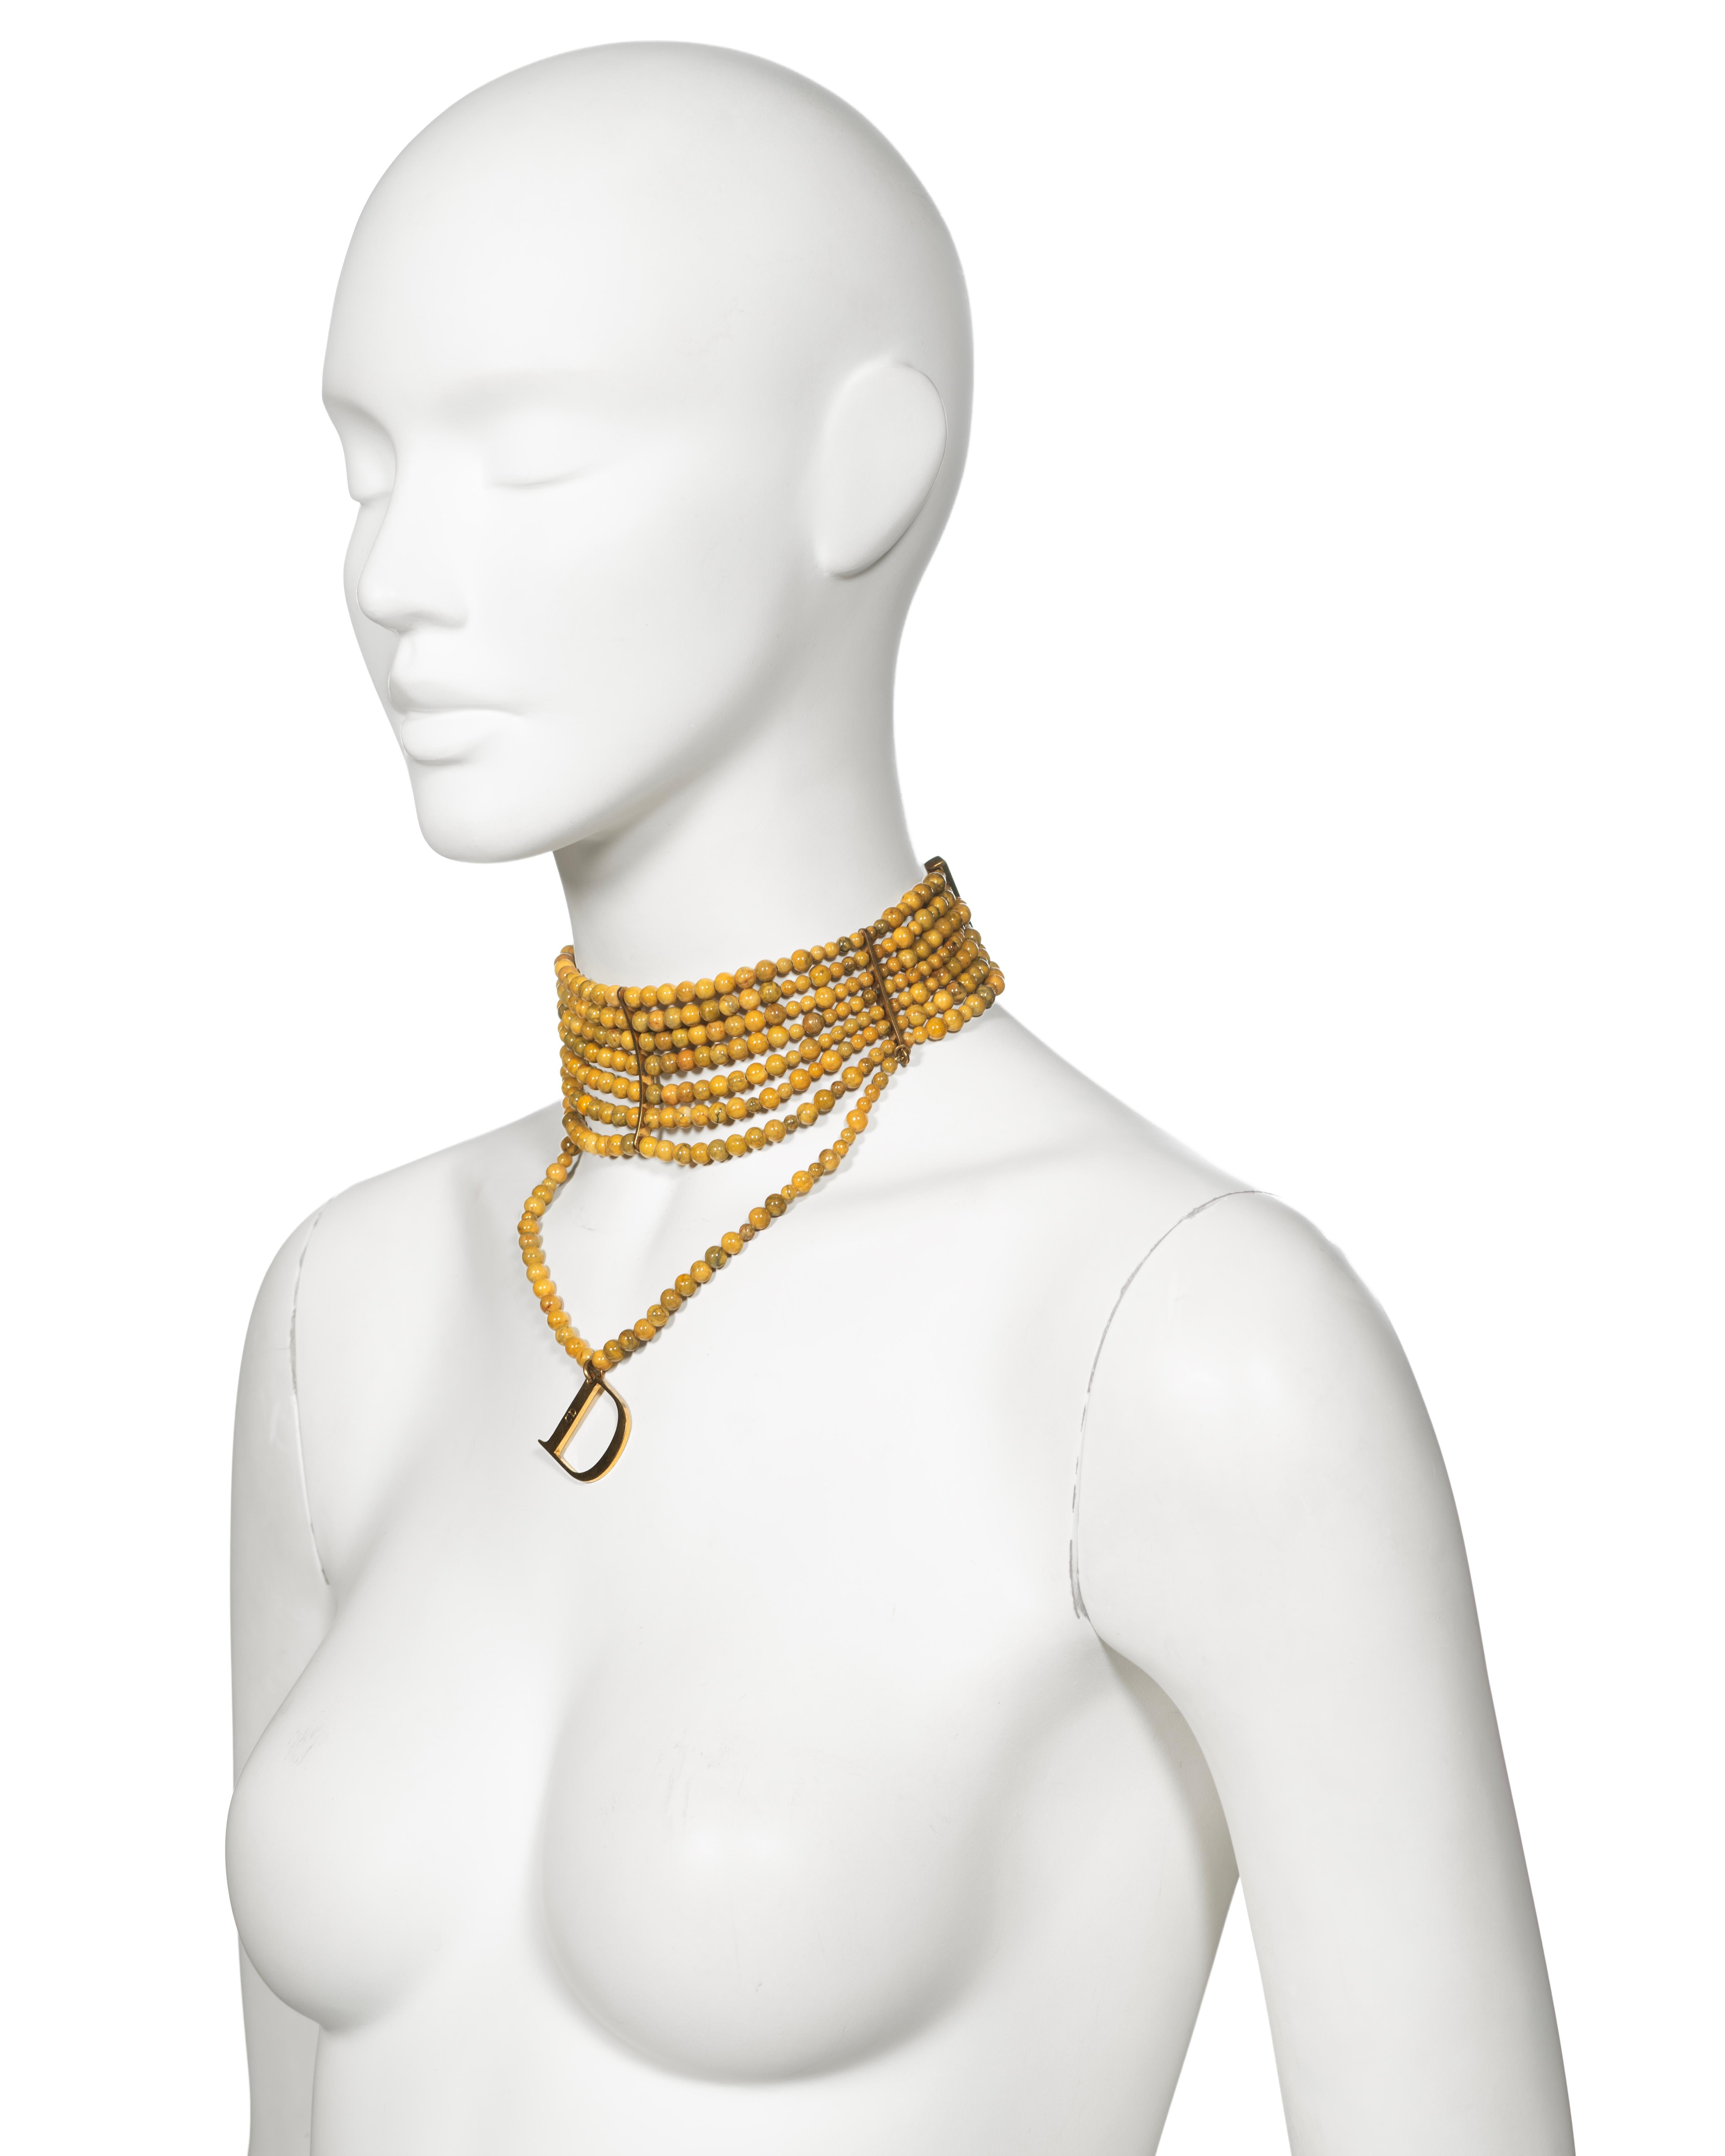 Christian Dior by John Galliano Marbled Glass Bead Choker Necklace, c. 1998 For Sale 2